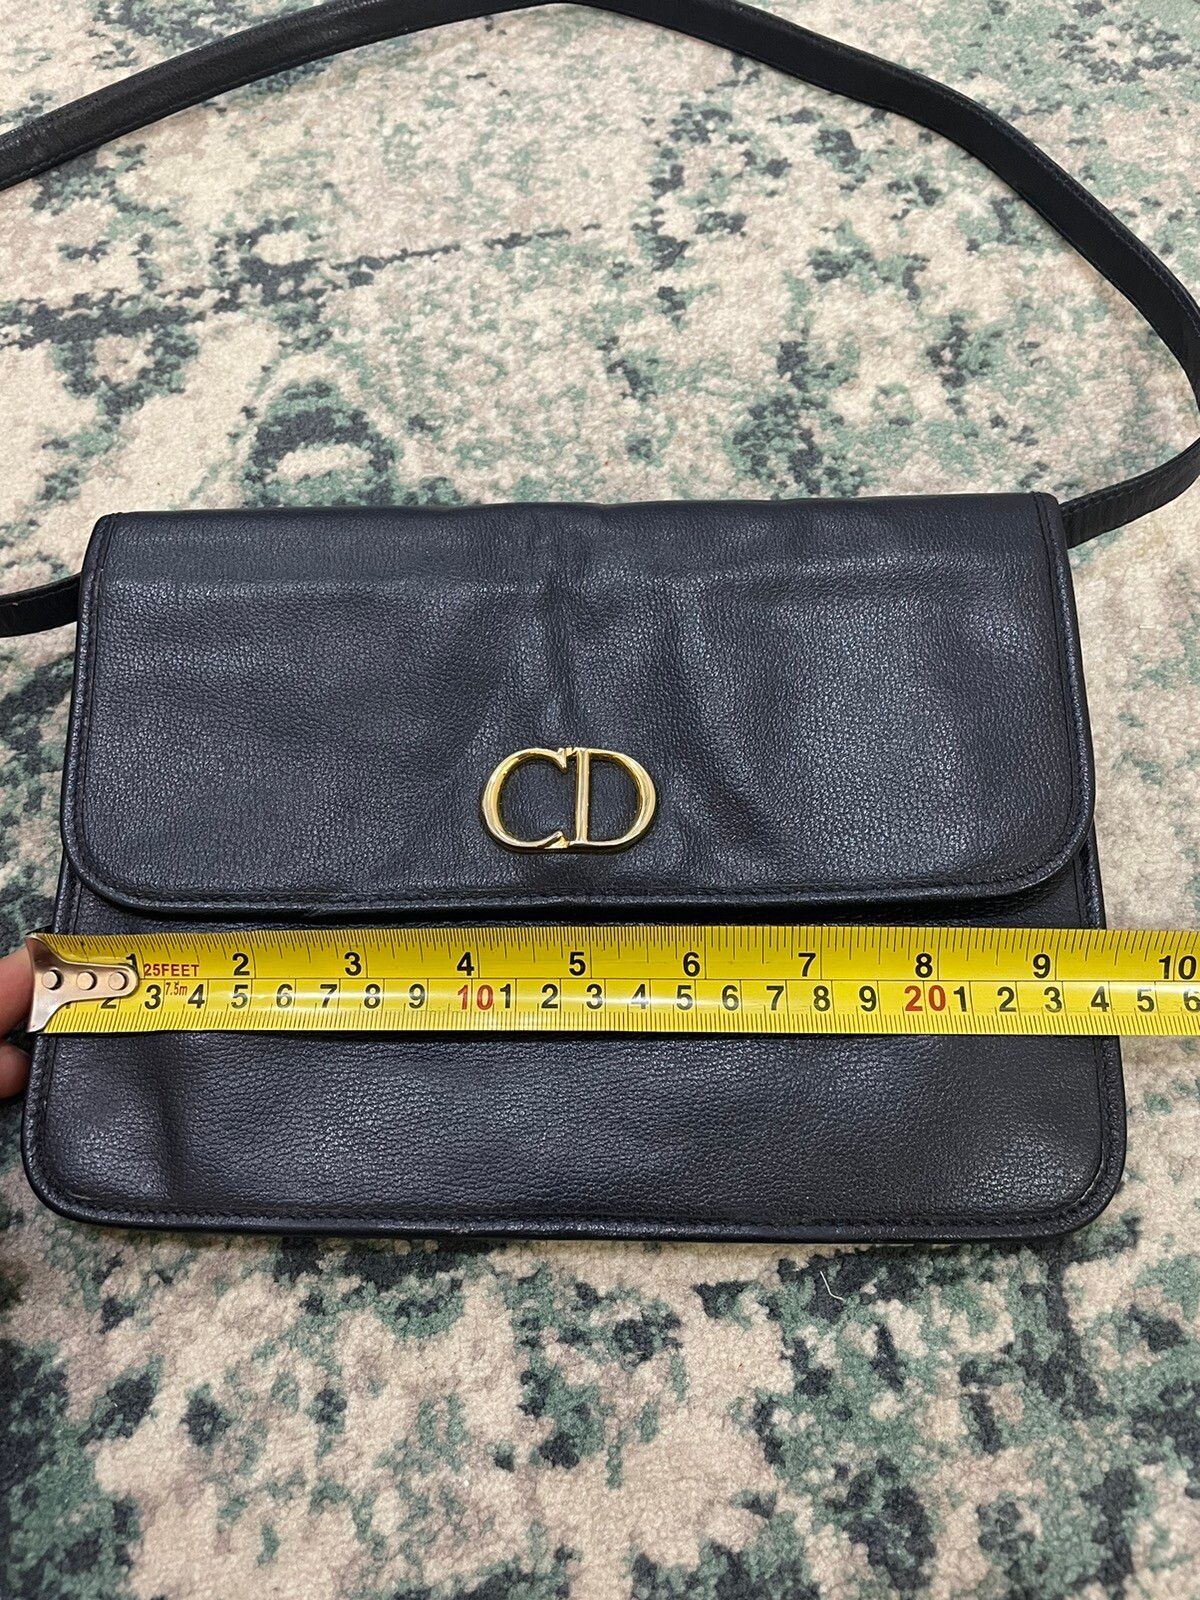 Authentic Vintage Christian Dior CD Fully Leather Sling Bag - 22